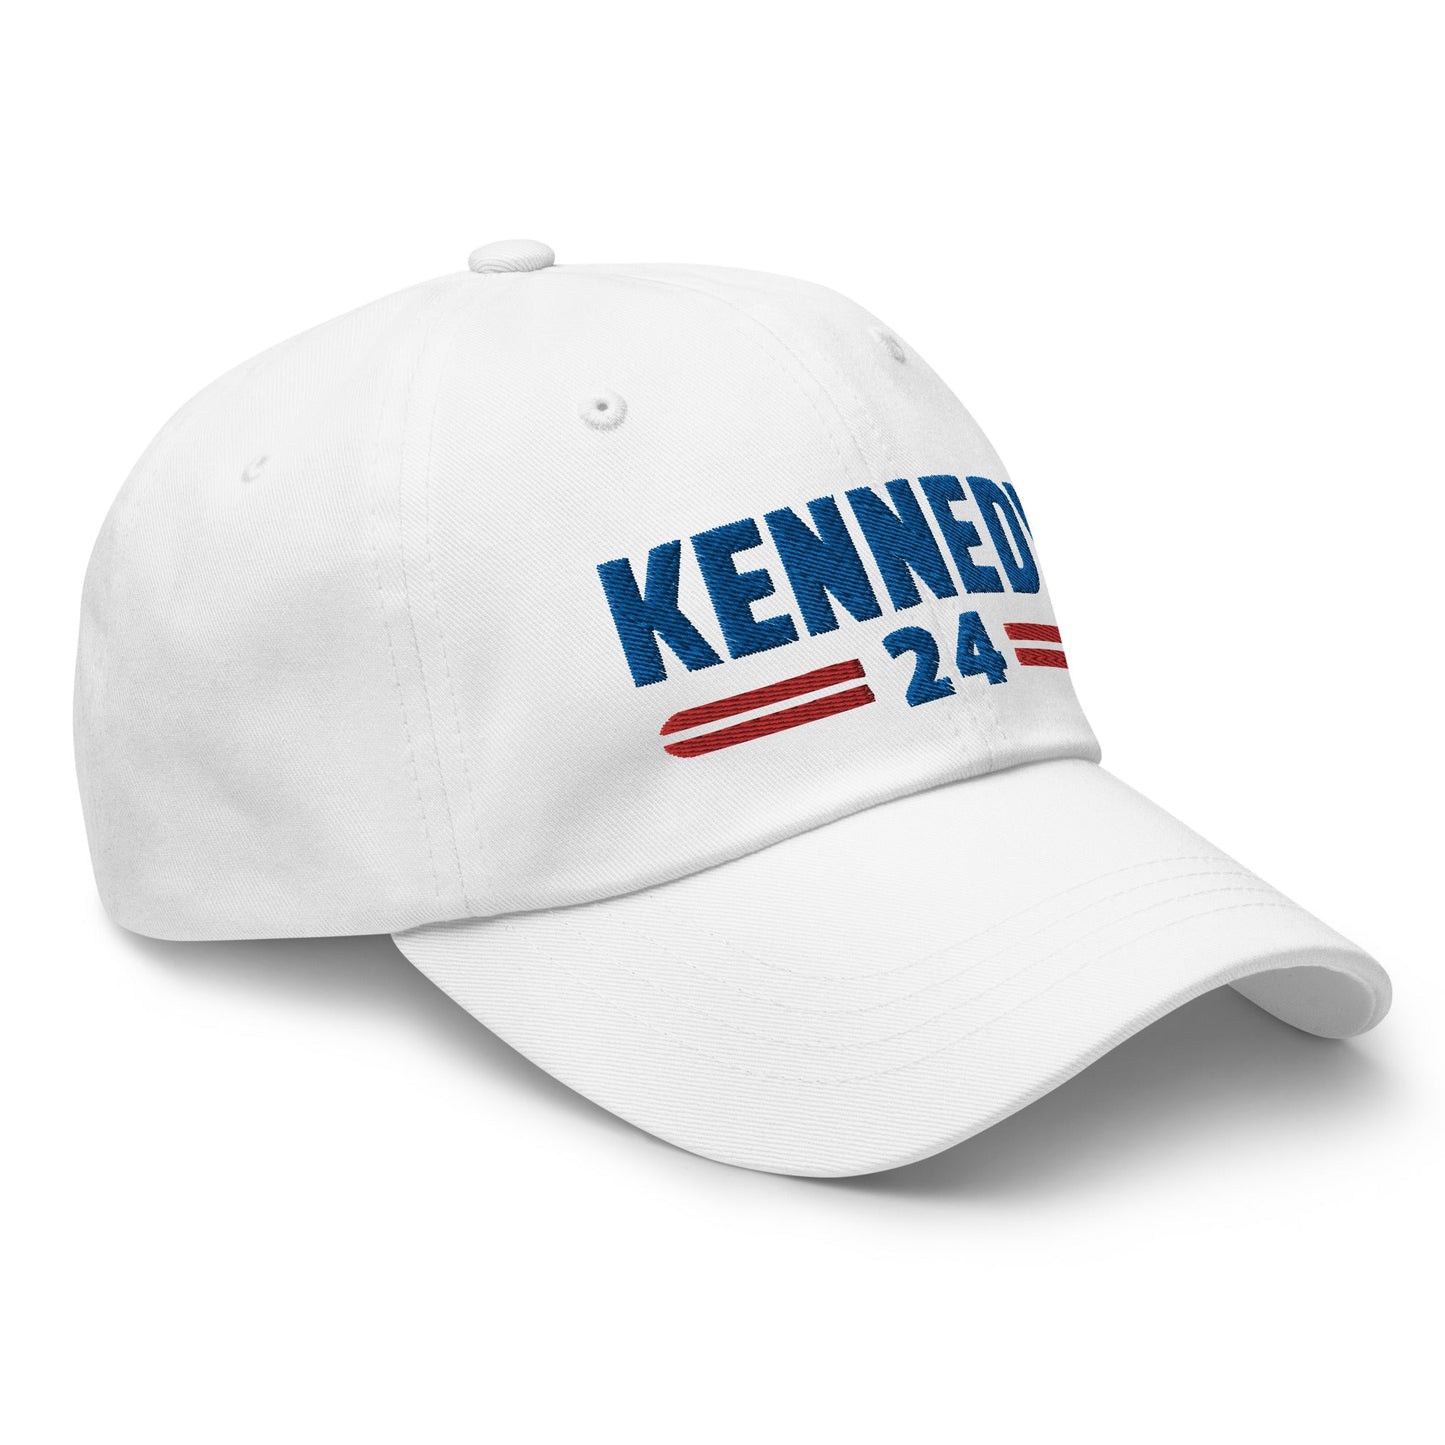 Kennedy Classic Embroidered Dad Hat - White - TEAM KENNEDY. All rights reserved